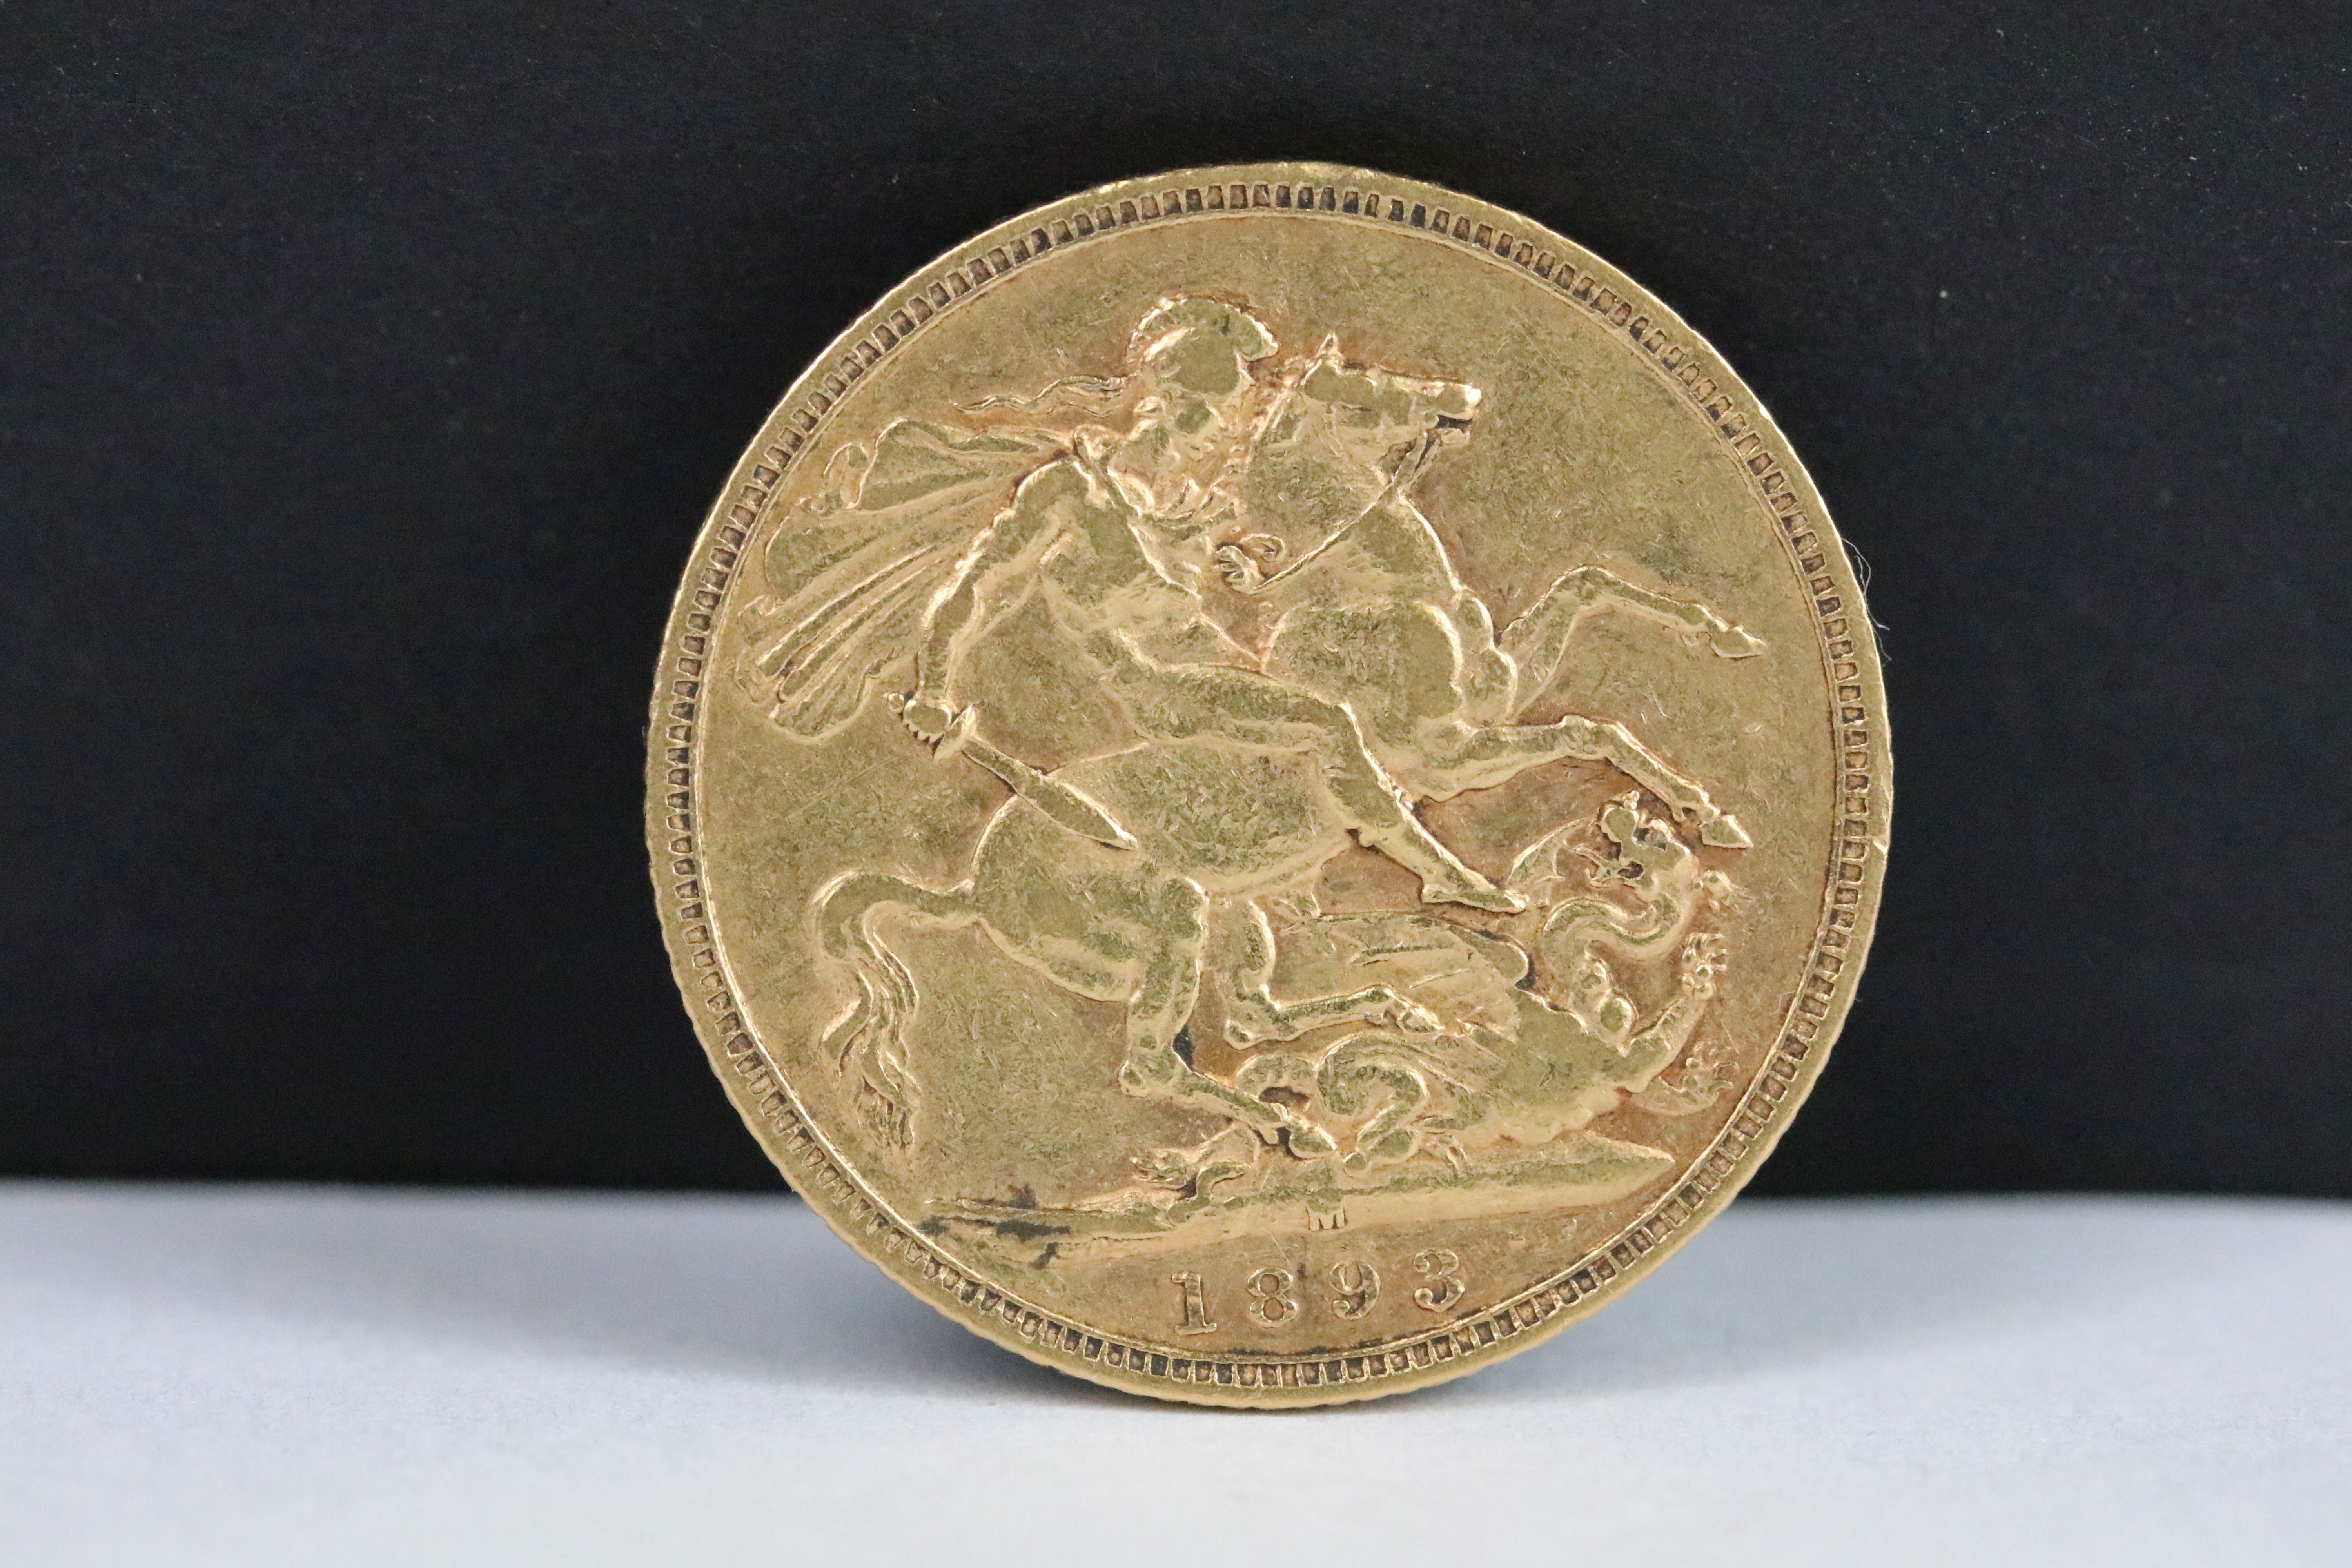 A British Queen Victoria 1893 gold full sovereign coin.